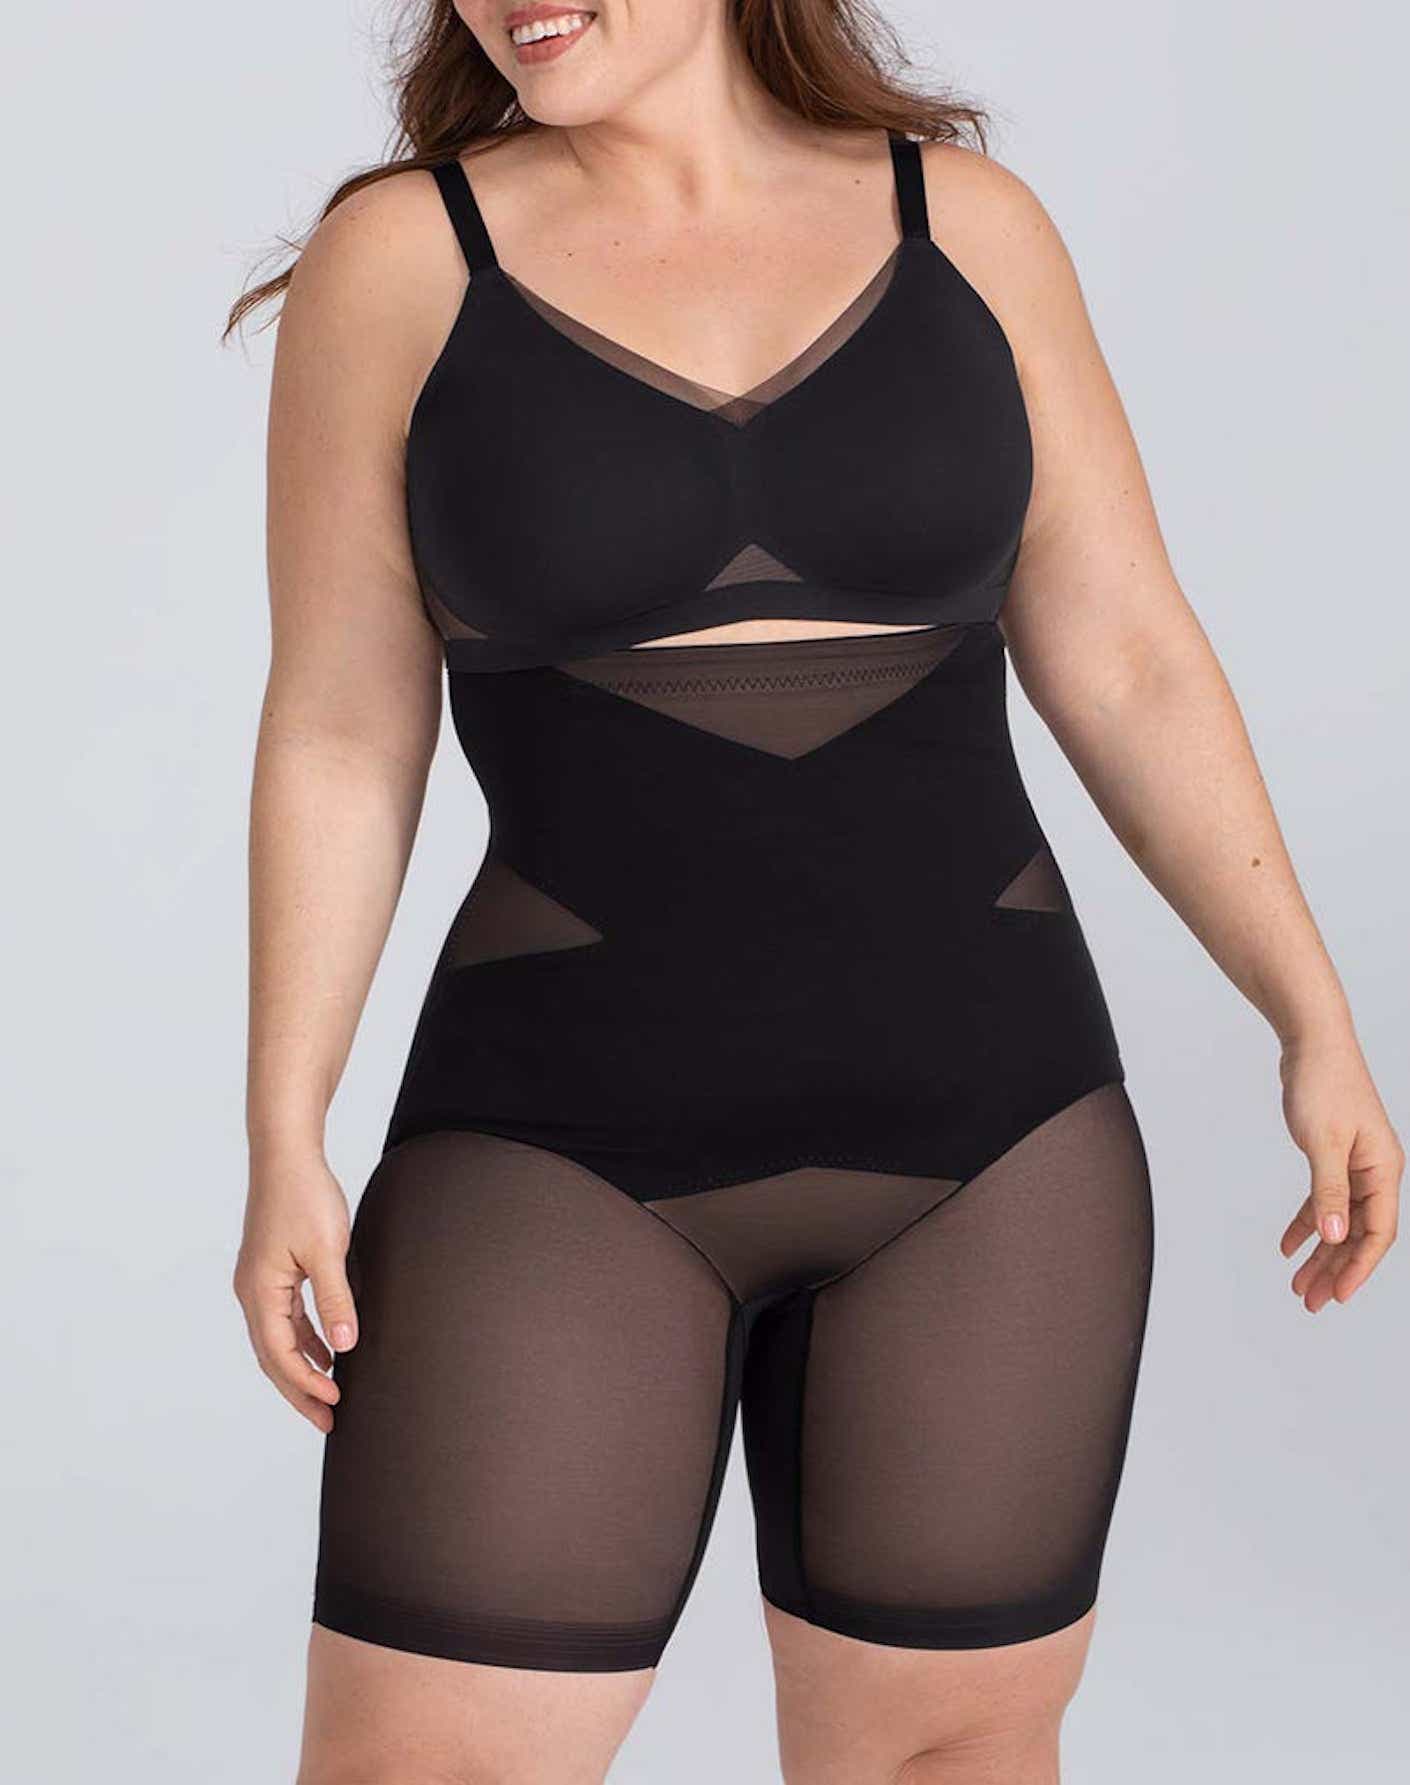 Our shapewear is your style's best friend. 💃✨ #SlayTheDay . . . . .  #basicintimates #lingerie #shapewear #corsets